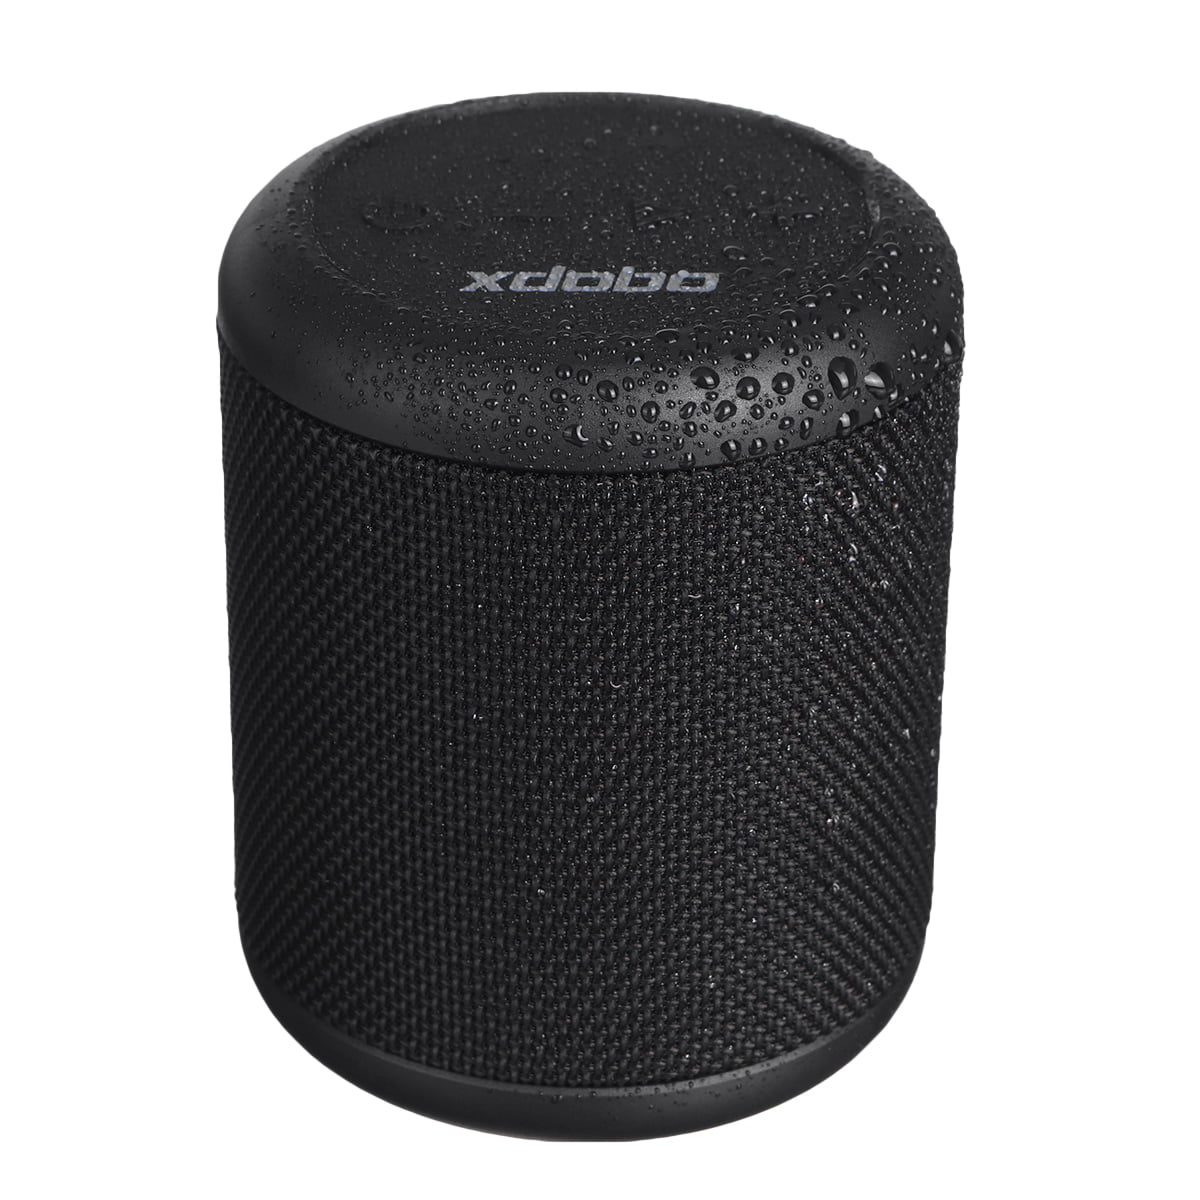 H930 BLUETOOTH WATERPROOF WIRELESS TRAVEL SPEAKER WITH MIC For LG V30 